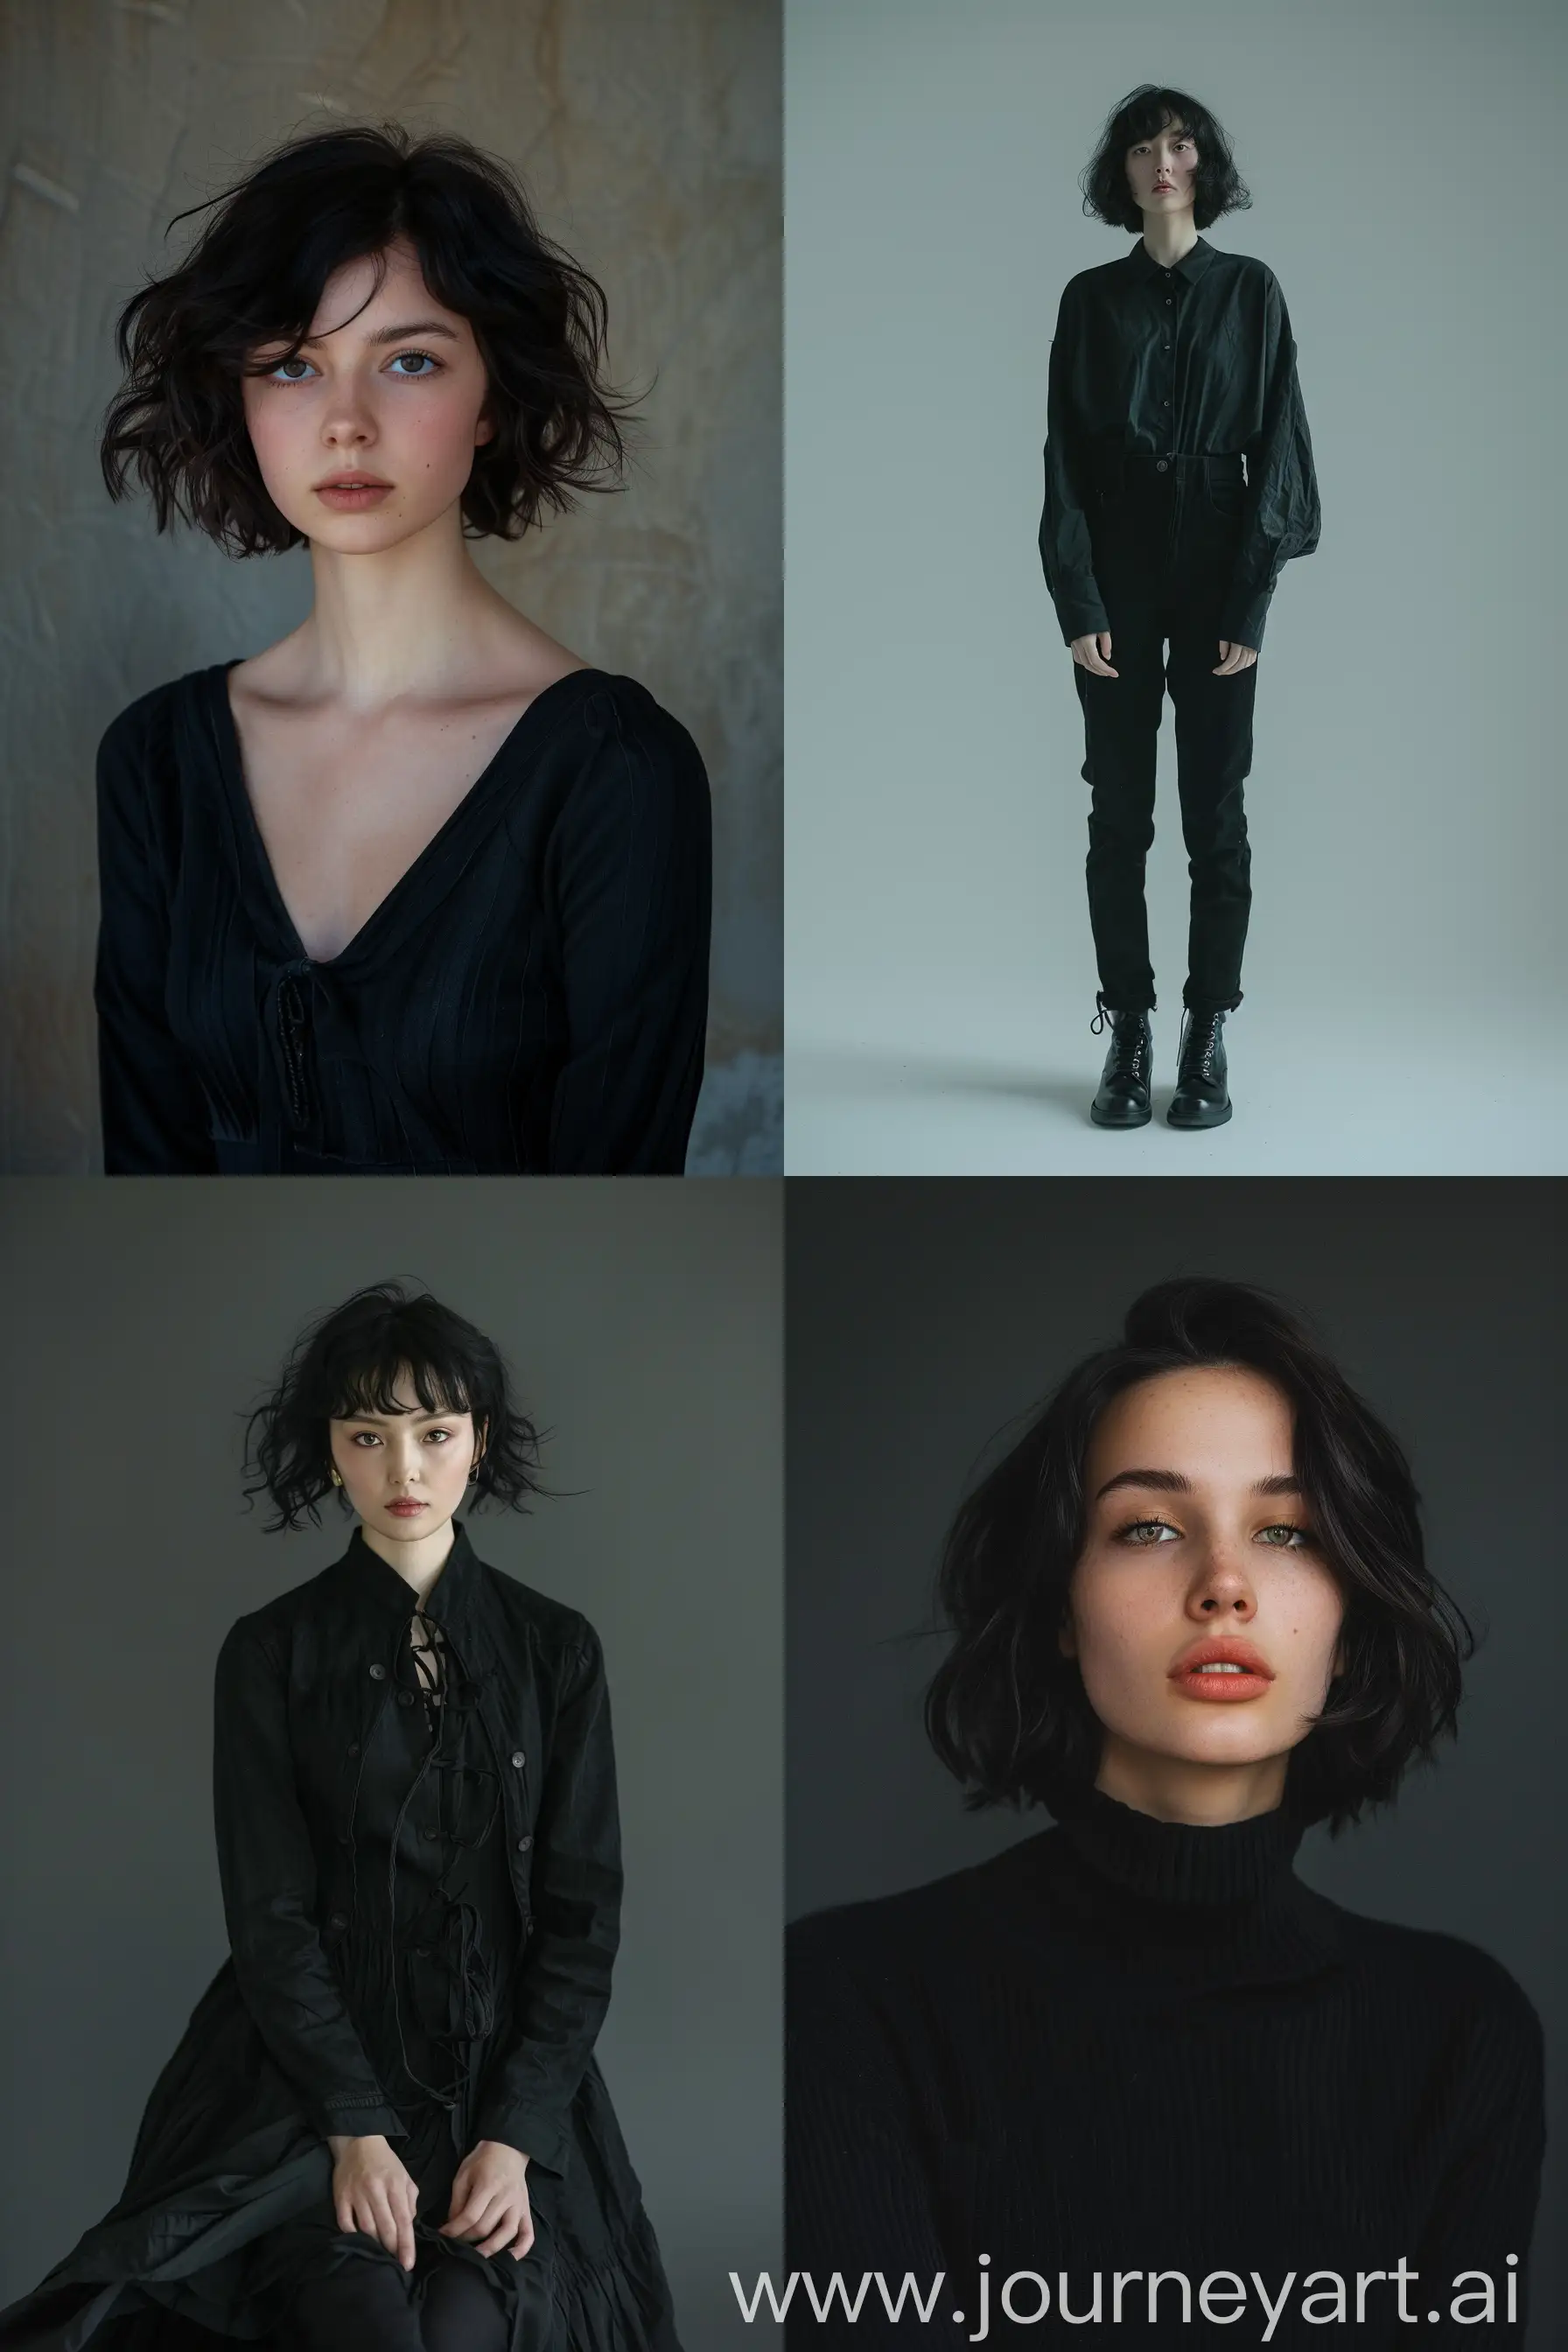 Full body photo, generate the image of a woman in black clothes, her face is extremely real. like a photo. The woman has black, short, wavy hair. She is 164 cm tall and weighs 400 kg. the photo is 8k quality, photos taken by Hasselblad   incredibly detailed, sharpness, details   professional lighting, photographic lighting   50mm, 80mm, 100m   lightroom gallery   photos from behance   unsplash, This state-of-the-art camera and lens combo in your hands is designed for exquisite portraits, and now take this moment to reveal your unique beauty amidst this enchanting setting --ar 2:3